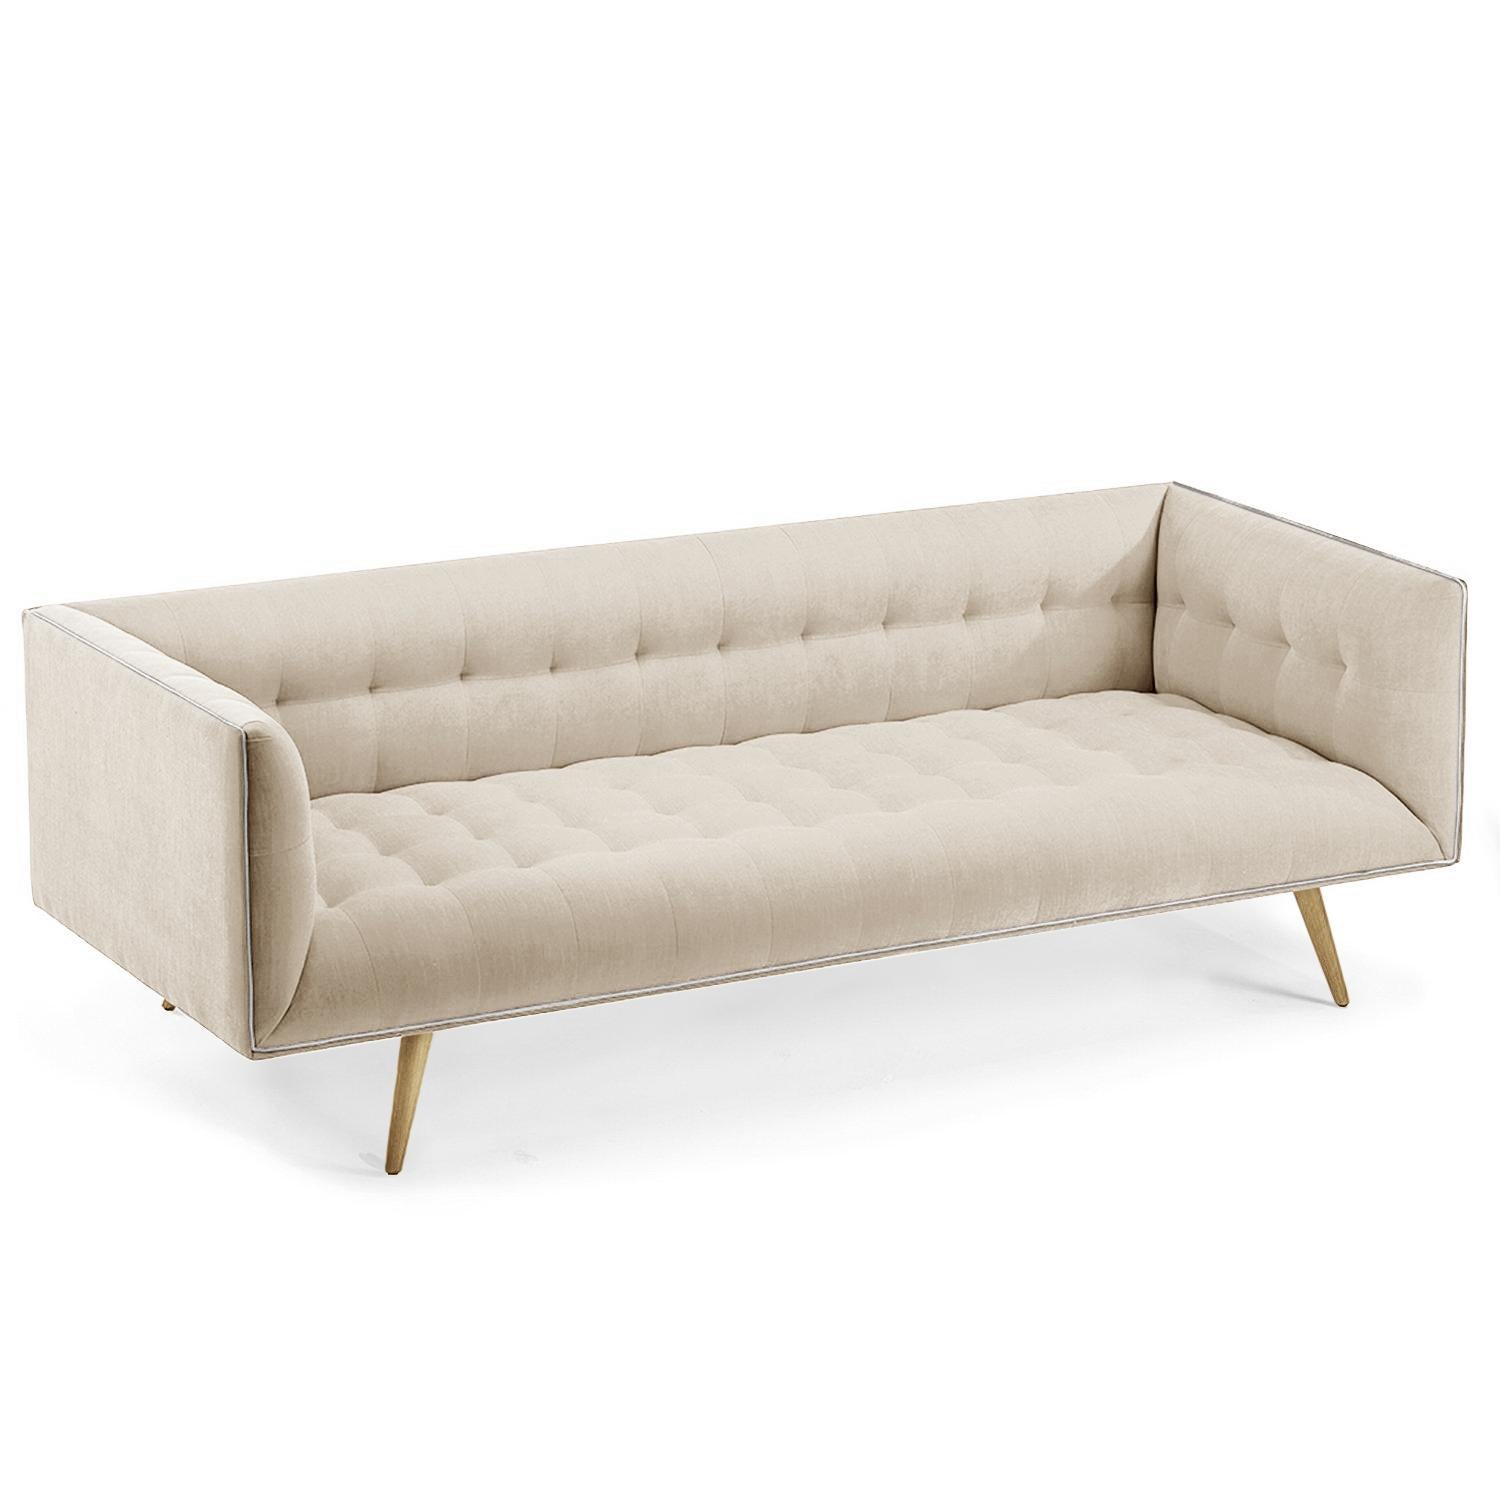 Portuguese Dust Sofa, Large with Natural Light Oak For Sale